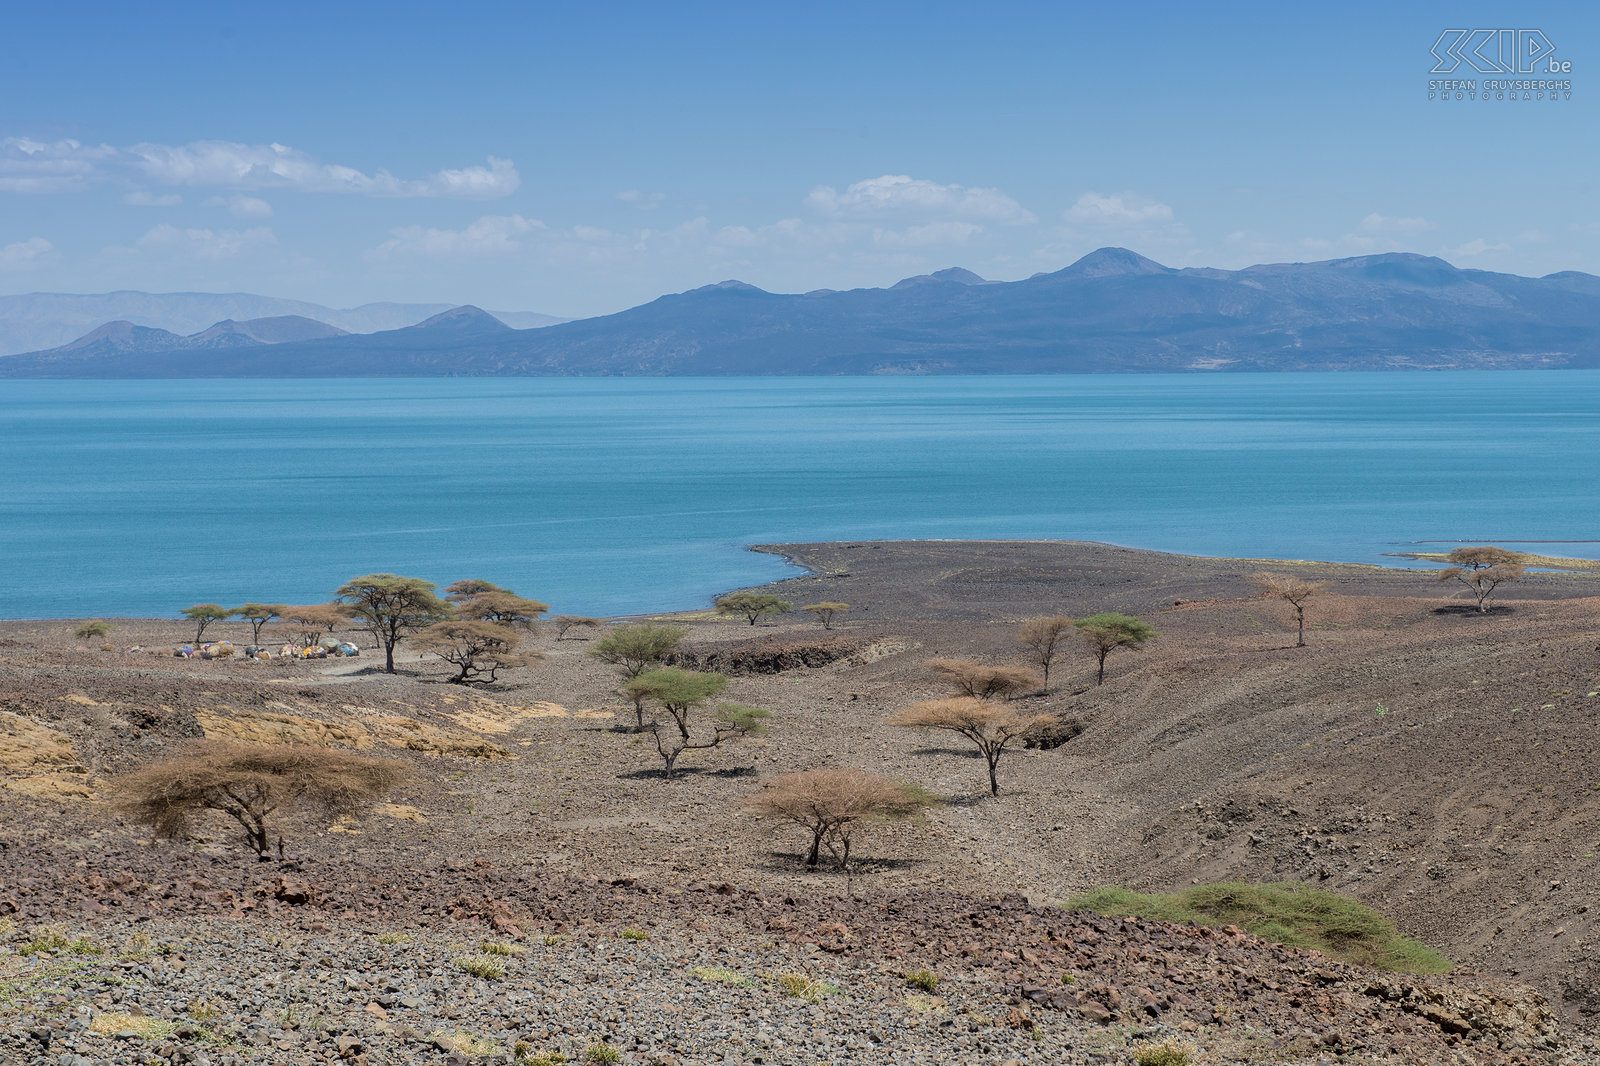 Lake Turkana Lake Turkana, formerly known as Lake Rudolf, is located in the north of Kenya. It is the world's largest largest alkaline lake. The small town of Loiyangalani is located on the southeastern coast of the lake. The region is hardly visited by tourists. The temperature is usually high and life is hard, but the area with volcanic rocks is beautiful and there still live fascinating authentic tribes such as the El Molo and Turkana. Loiyangalani was the setting for John le Carré's novel 'The Constant Gardener' and it was also the location for the movie. Stefan Cruysberghs